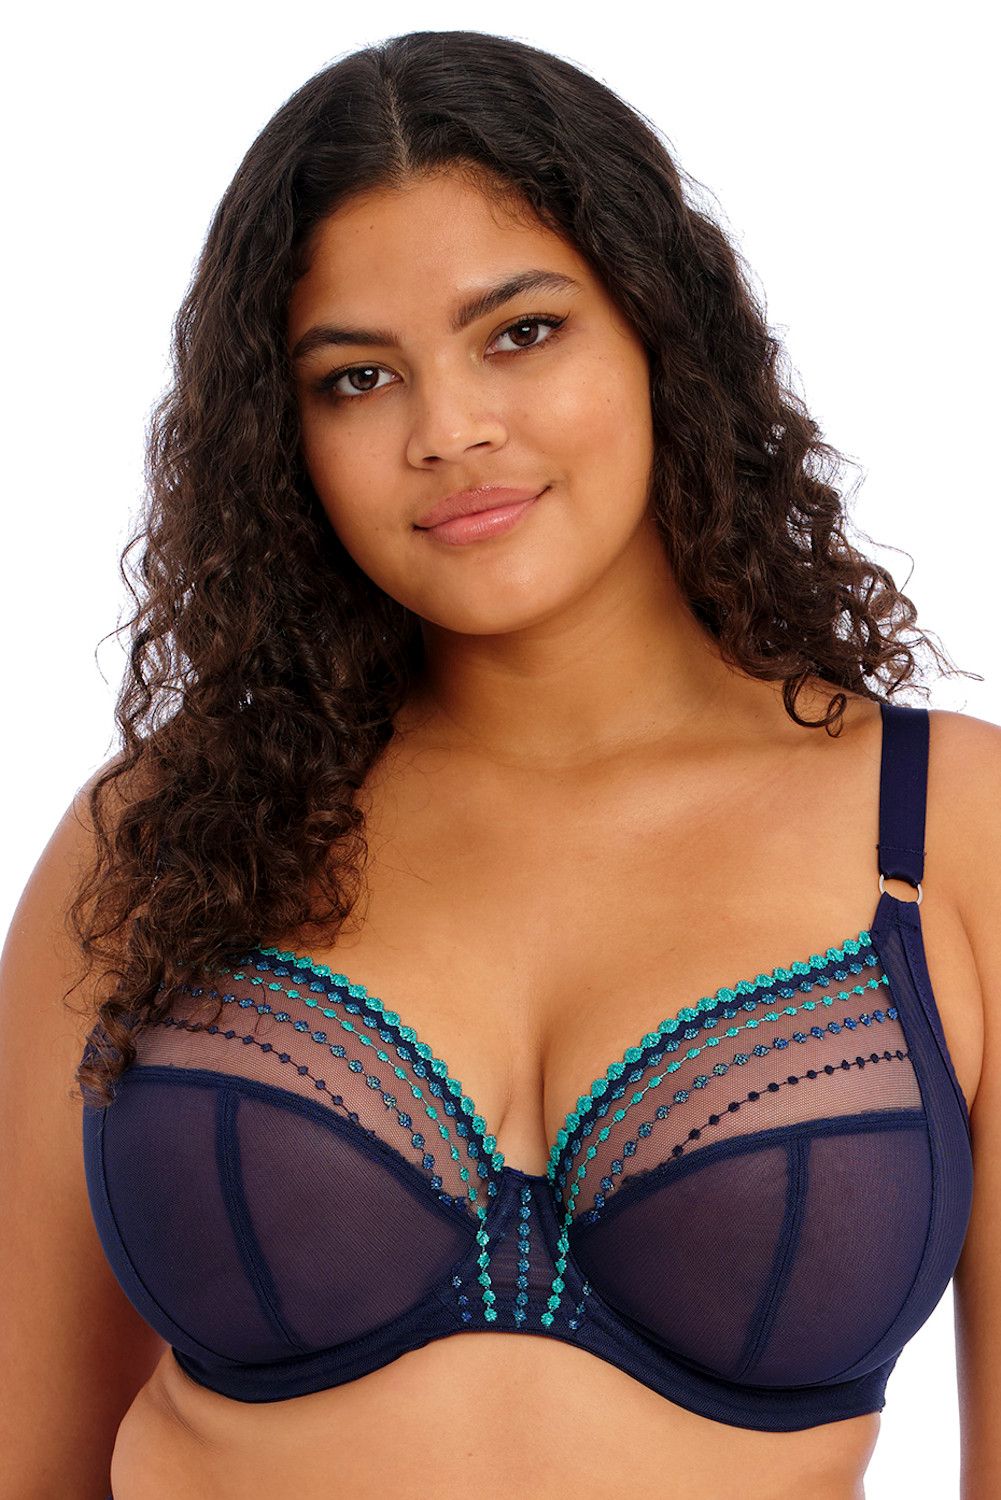 Is your bra size 40K???? Shop this super pretty Plunge bra (Matilda) now  for #21,500… Trust me when I say this price is heavily disco